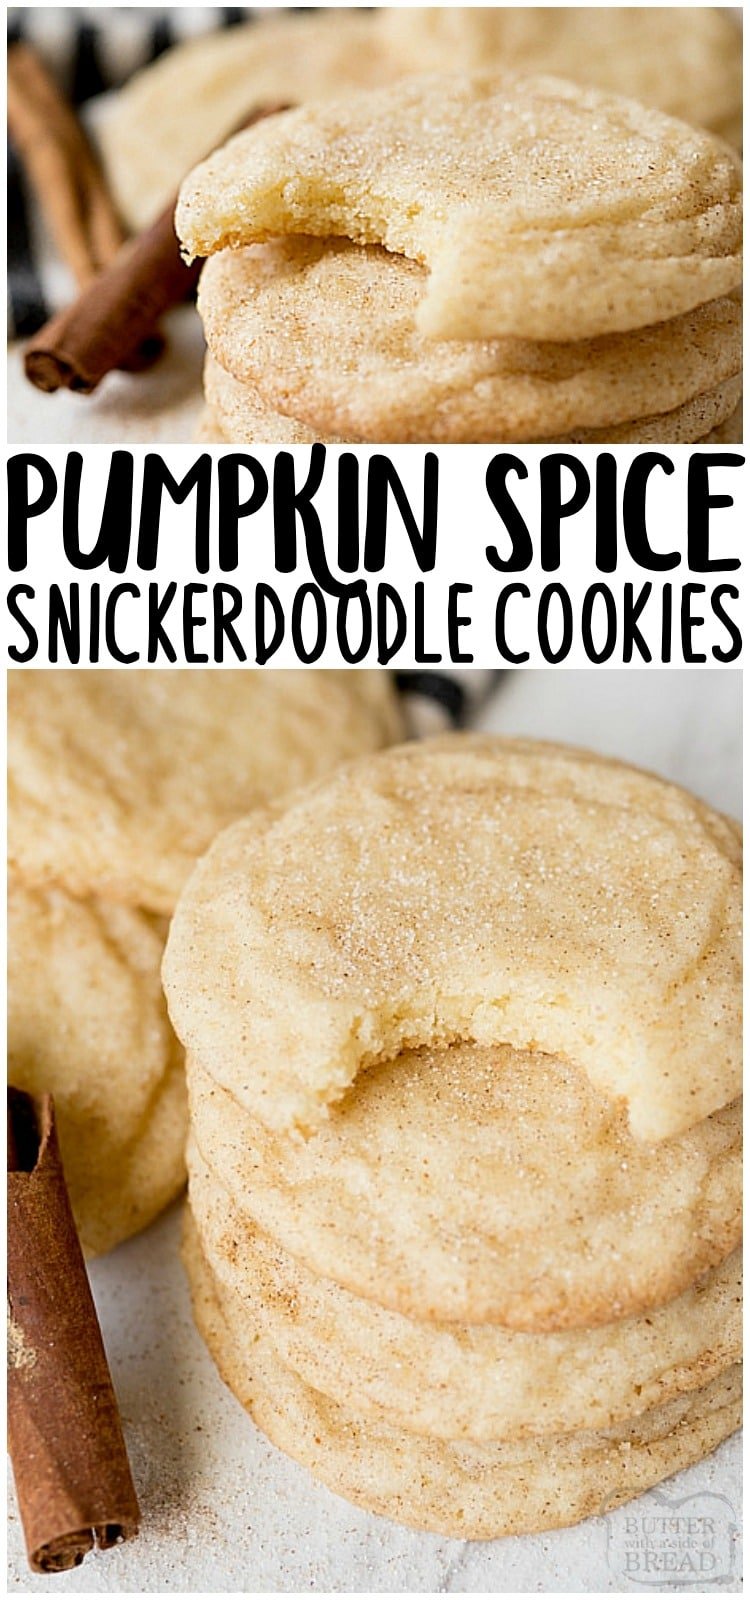 Pumpkin Spice Snickerdoodles are a soft, pillowy vanilla cookie rolled in pumpkin pie spice & sugar before baking! Fun Fall twist to classic snickerdoodle cookie recipe! PUMPKIN SPICE SNICKERDOODLE COOKIES from BUTTER WITH A SIDE OF BREAD #pumpkinspice #snickerdoodles #cookies #baking #dessertrecipes 